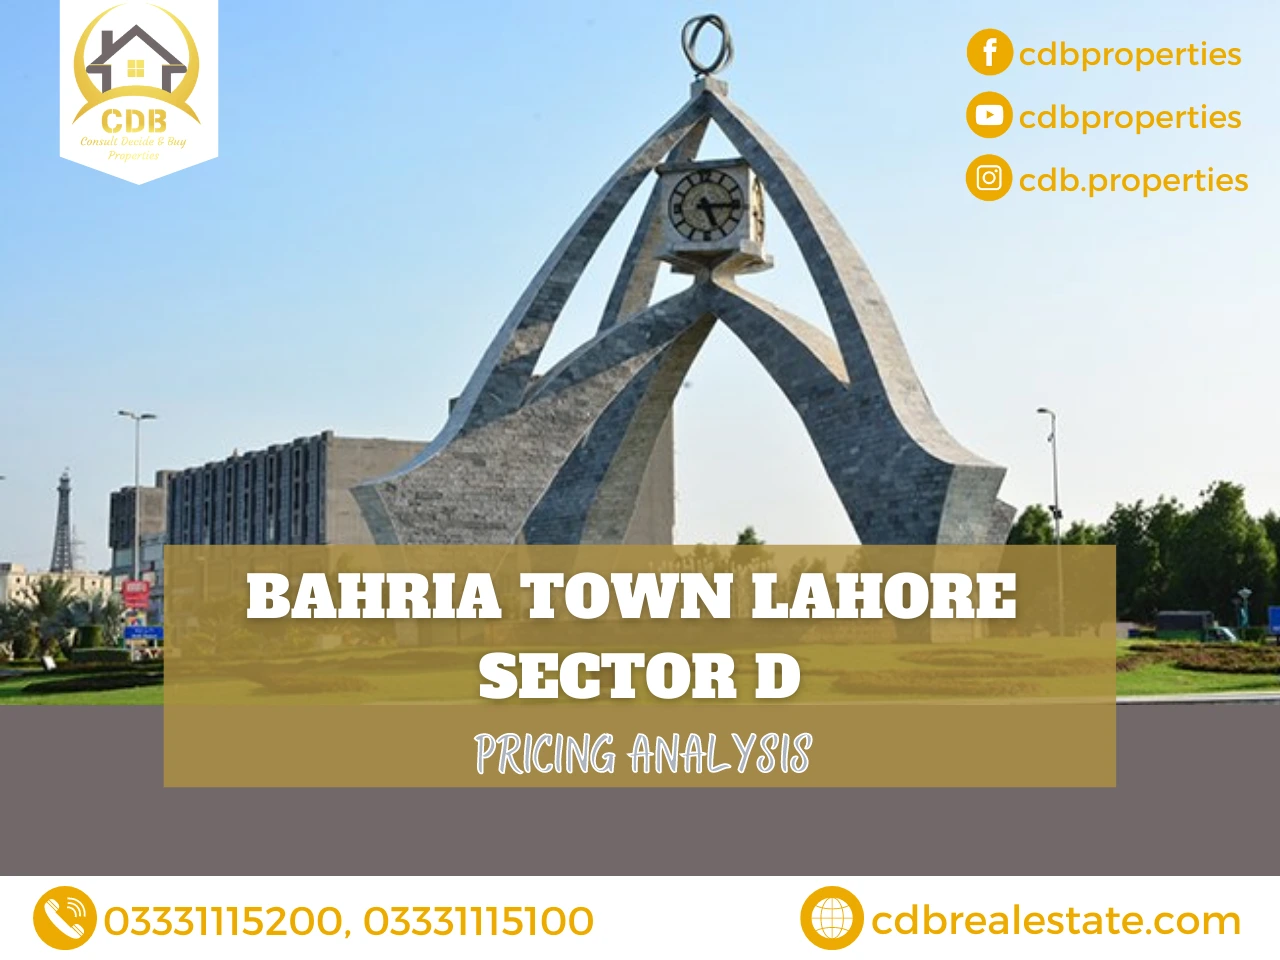 round about in bahria town lahore